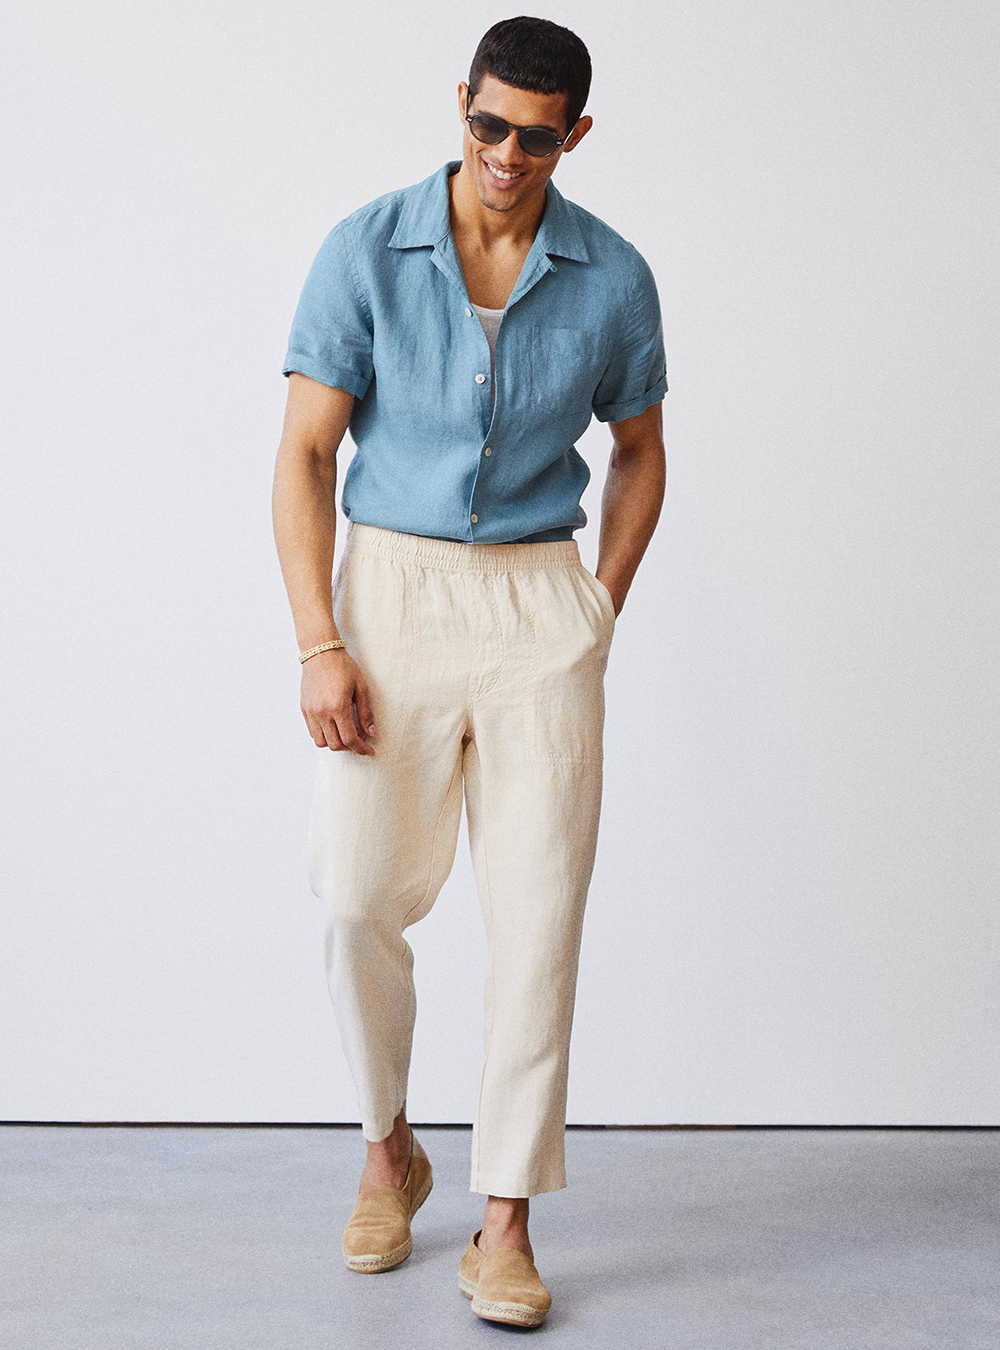 blue shirt, beige linen pants, and tan loafers